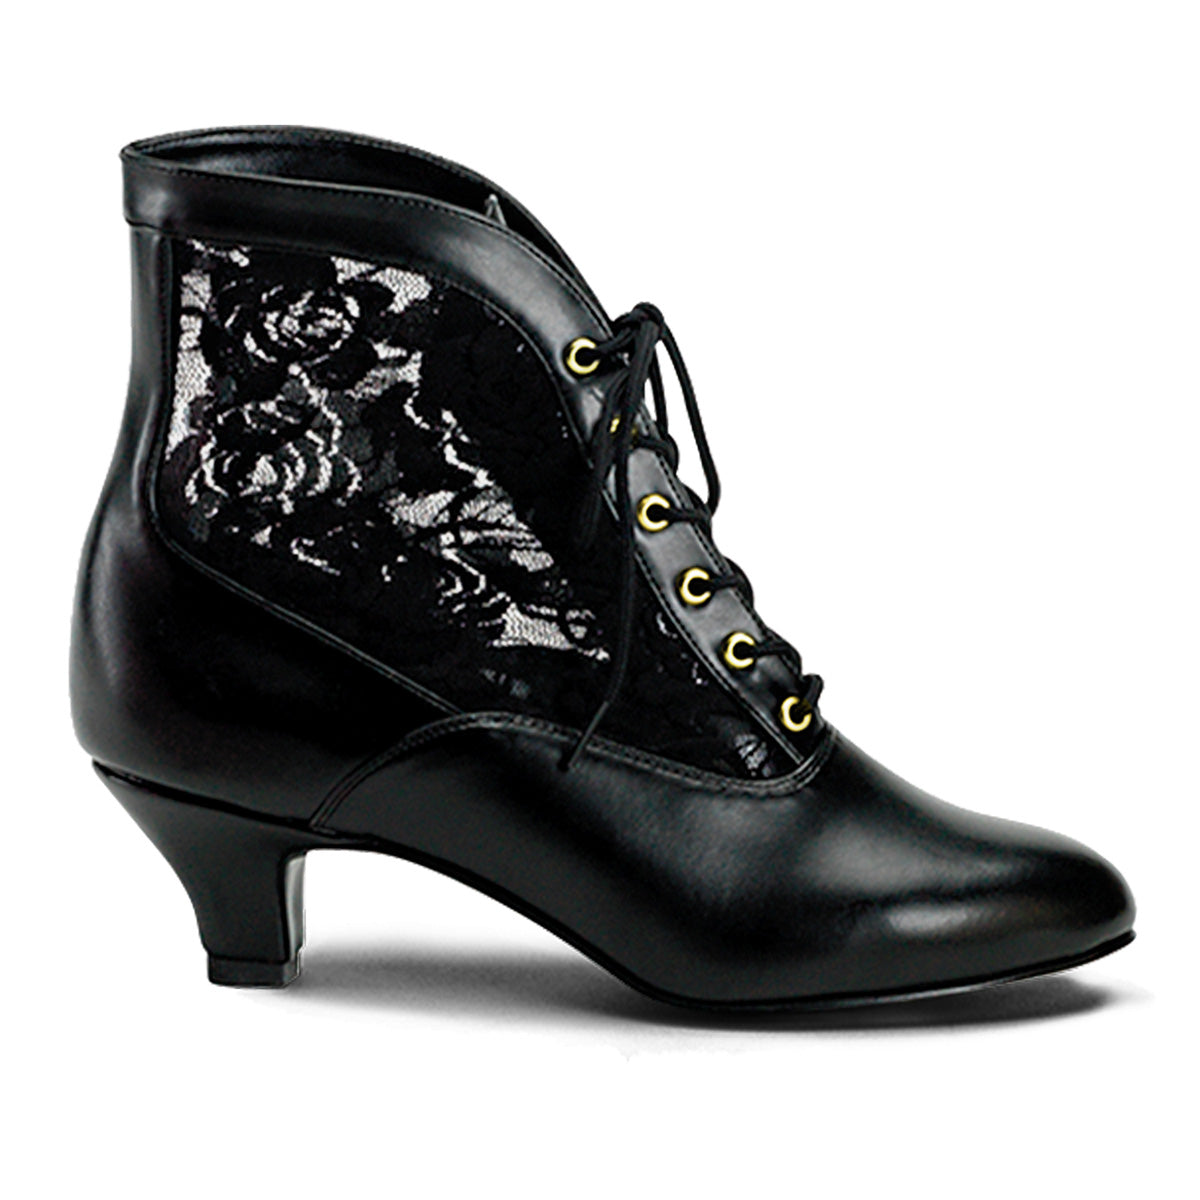 Funtasma Womens Ankle Boots DAME-05 Blk Pu-Lace